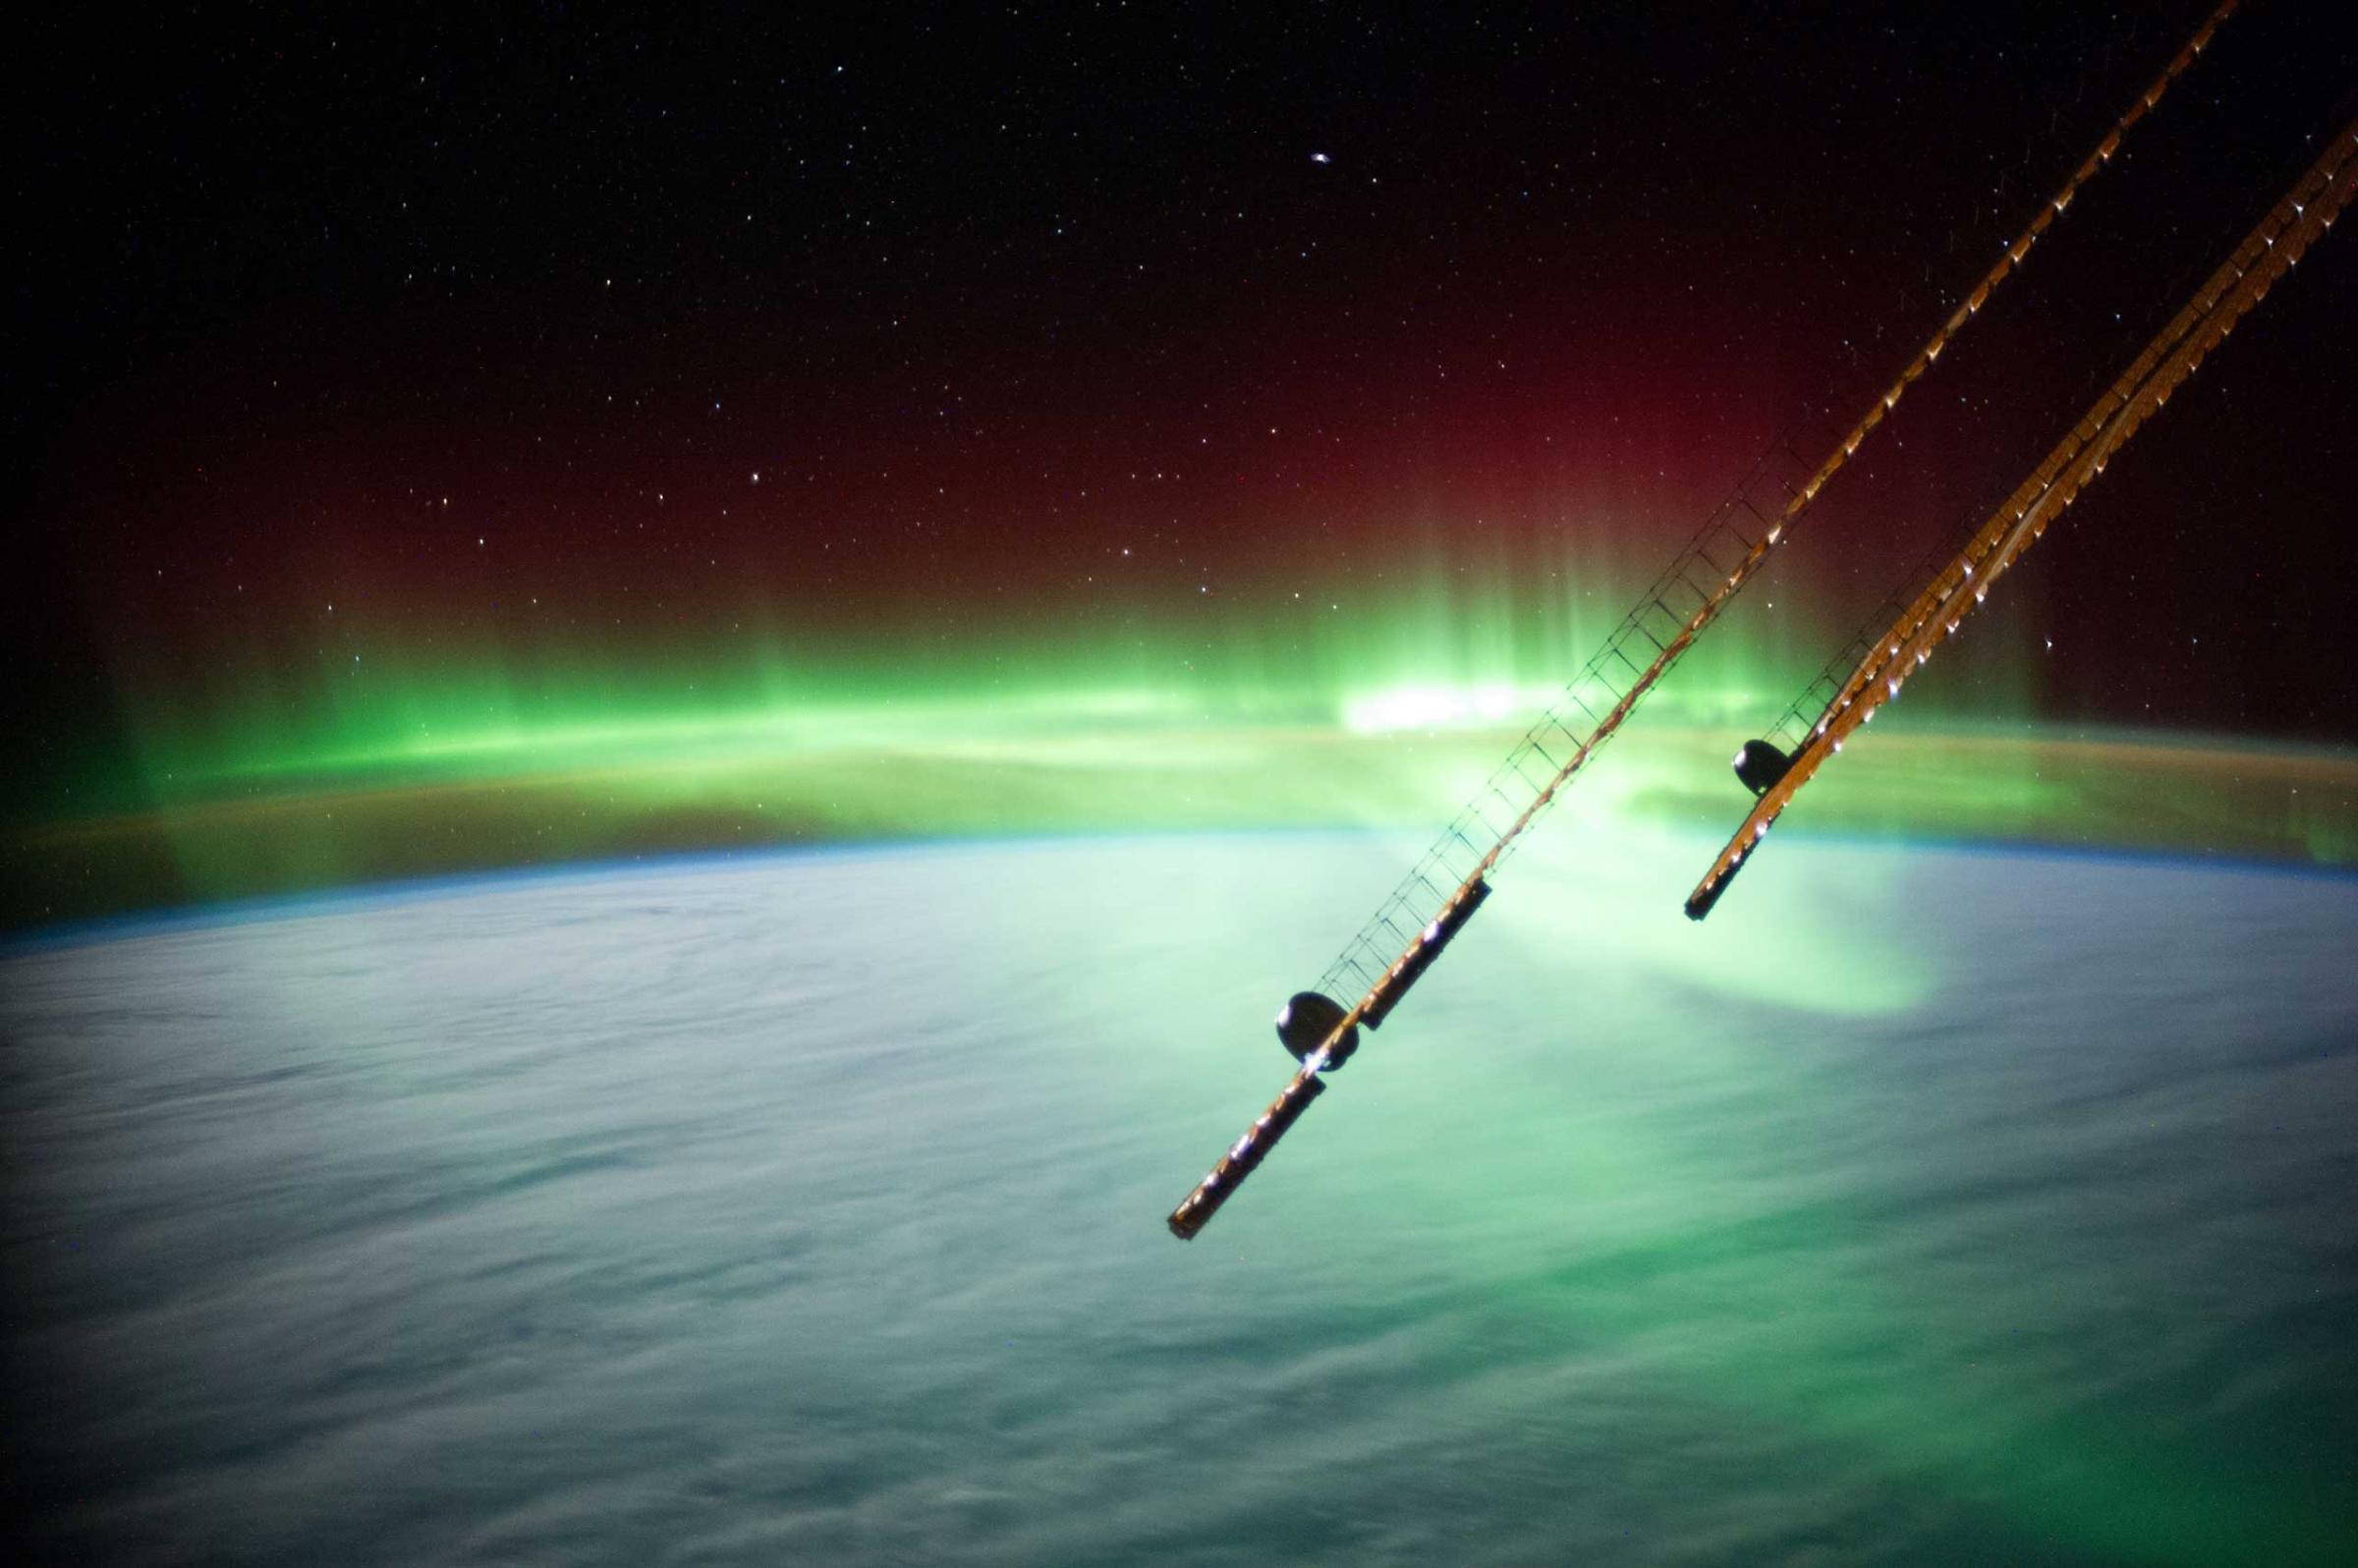 An aurora near Australia seen from the International SPace Station, released on July 15, 2014.